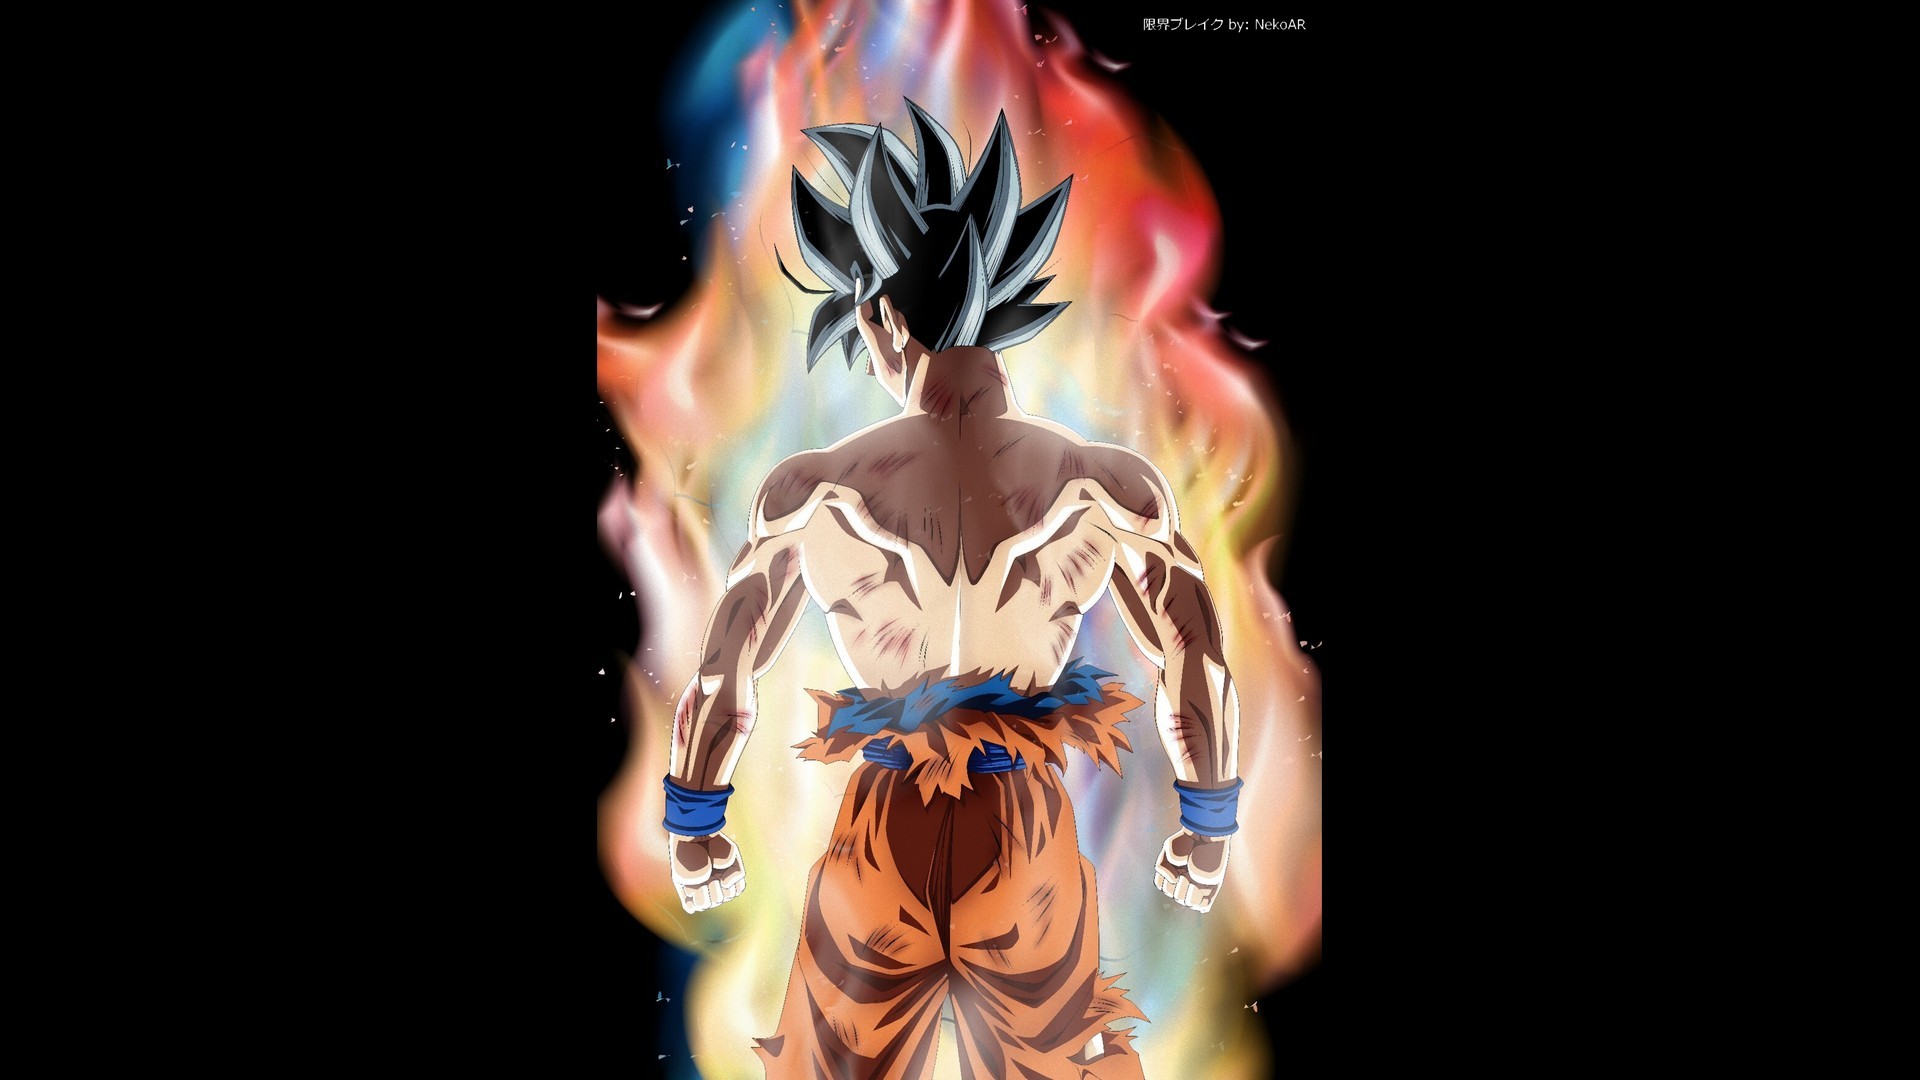 Wallpapers Goku Images with resolution 1920X1080 pixel. You can use this wallpaper as background for your desktop Computer Screensavers, Android or iPhone smartphones